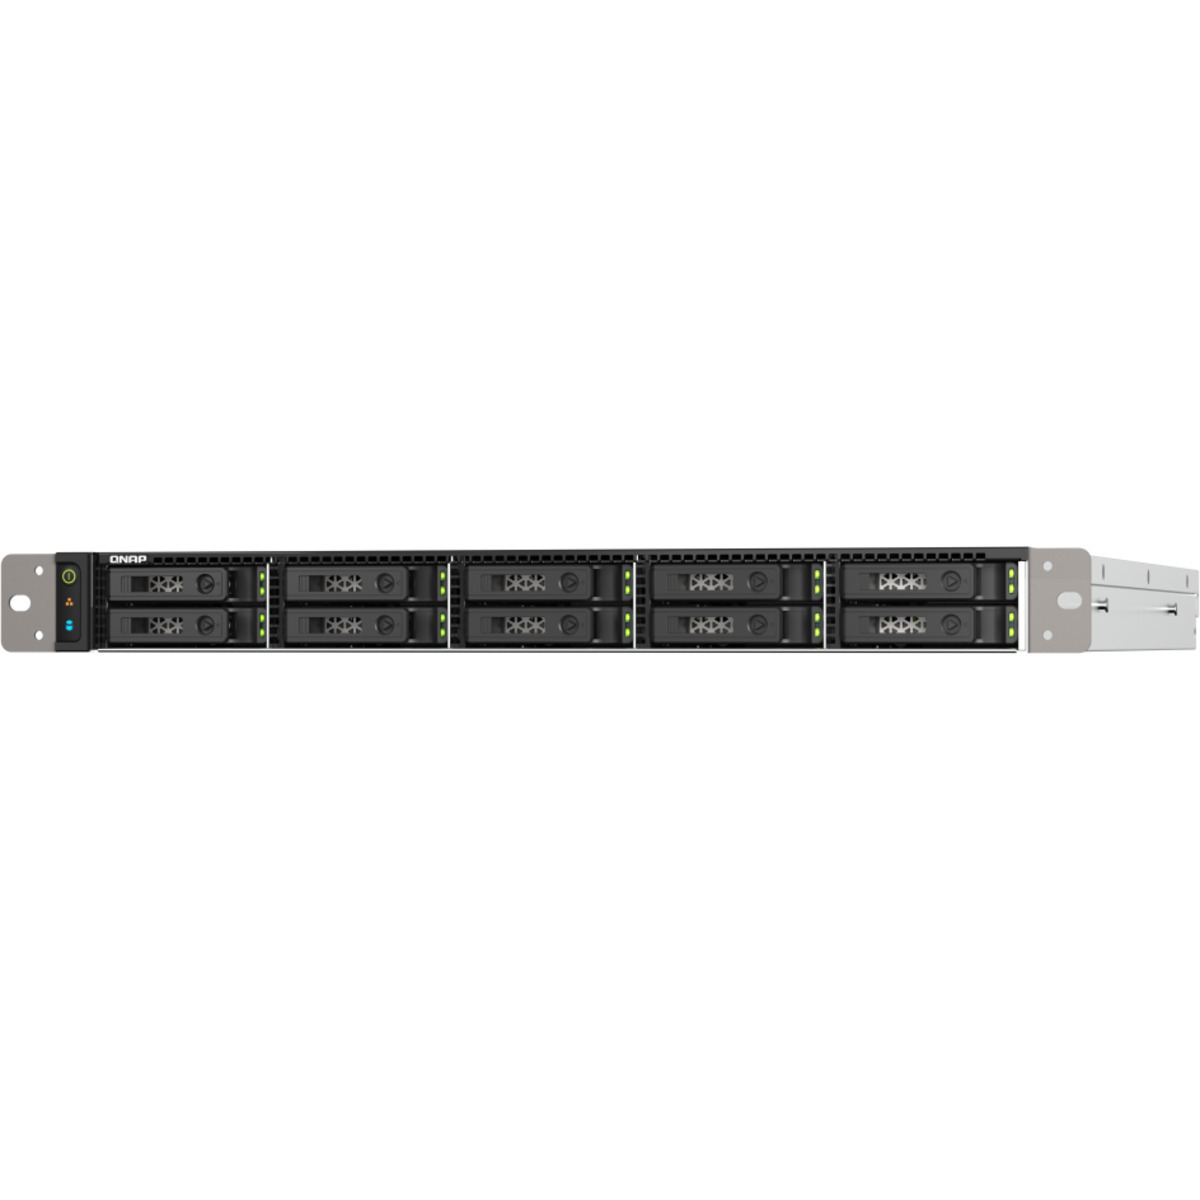 QNAP TS-h1090FU-7302P 16tb 10-Bay RackMount Large Business / Enterprise NAS - Network Attached Storage Device 8x2tb Samsung 870 EVO MZ-77E2T0BAM 2.5 560/530MB/s SATA 6Gb/s SSD CONSUMER Class Drives Installed - Burn-In Tested TS-h1090FU-7302P